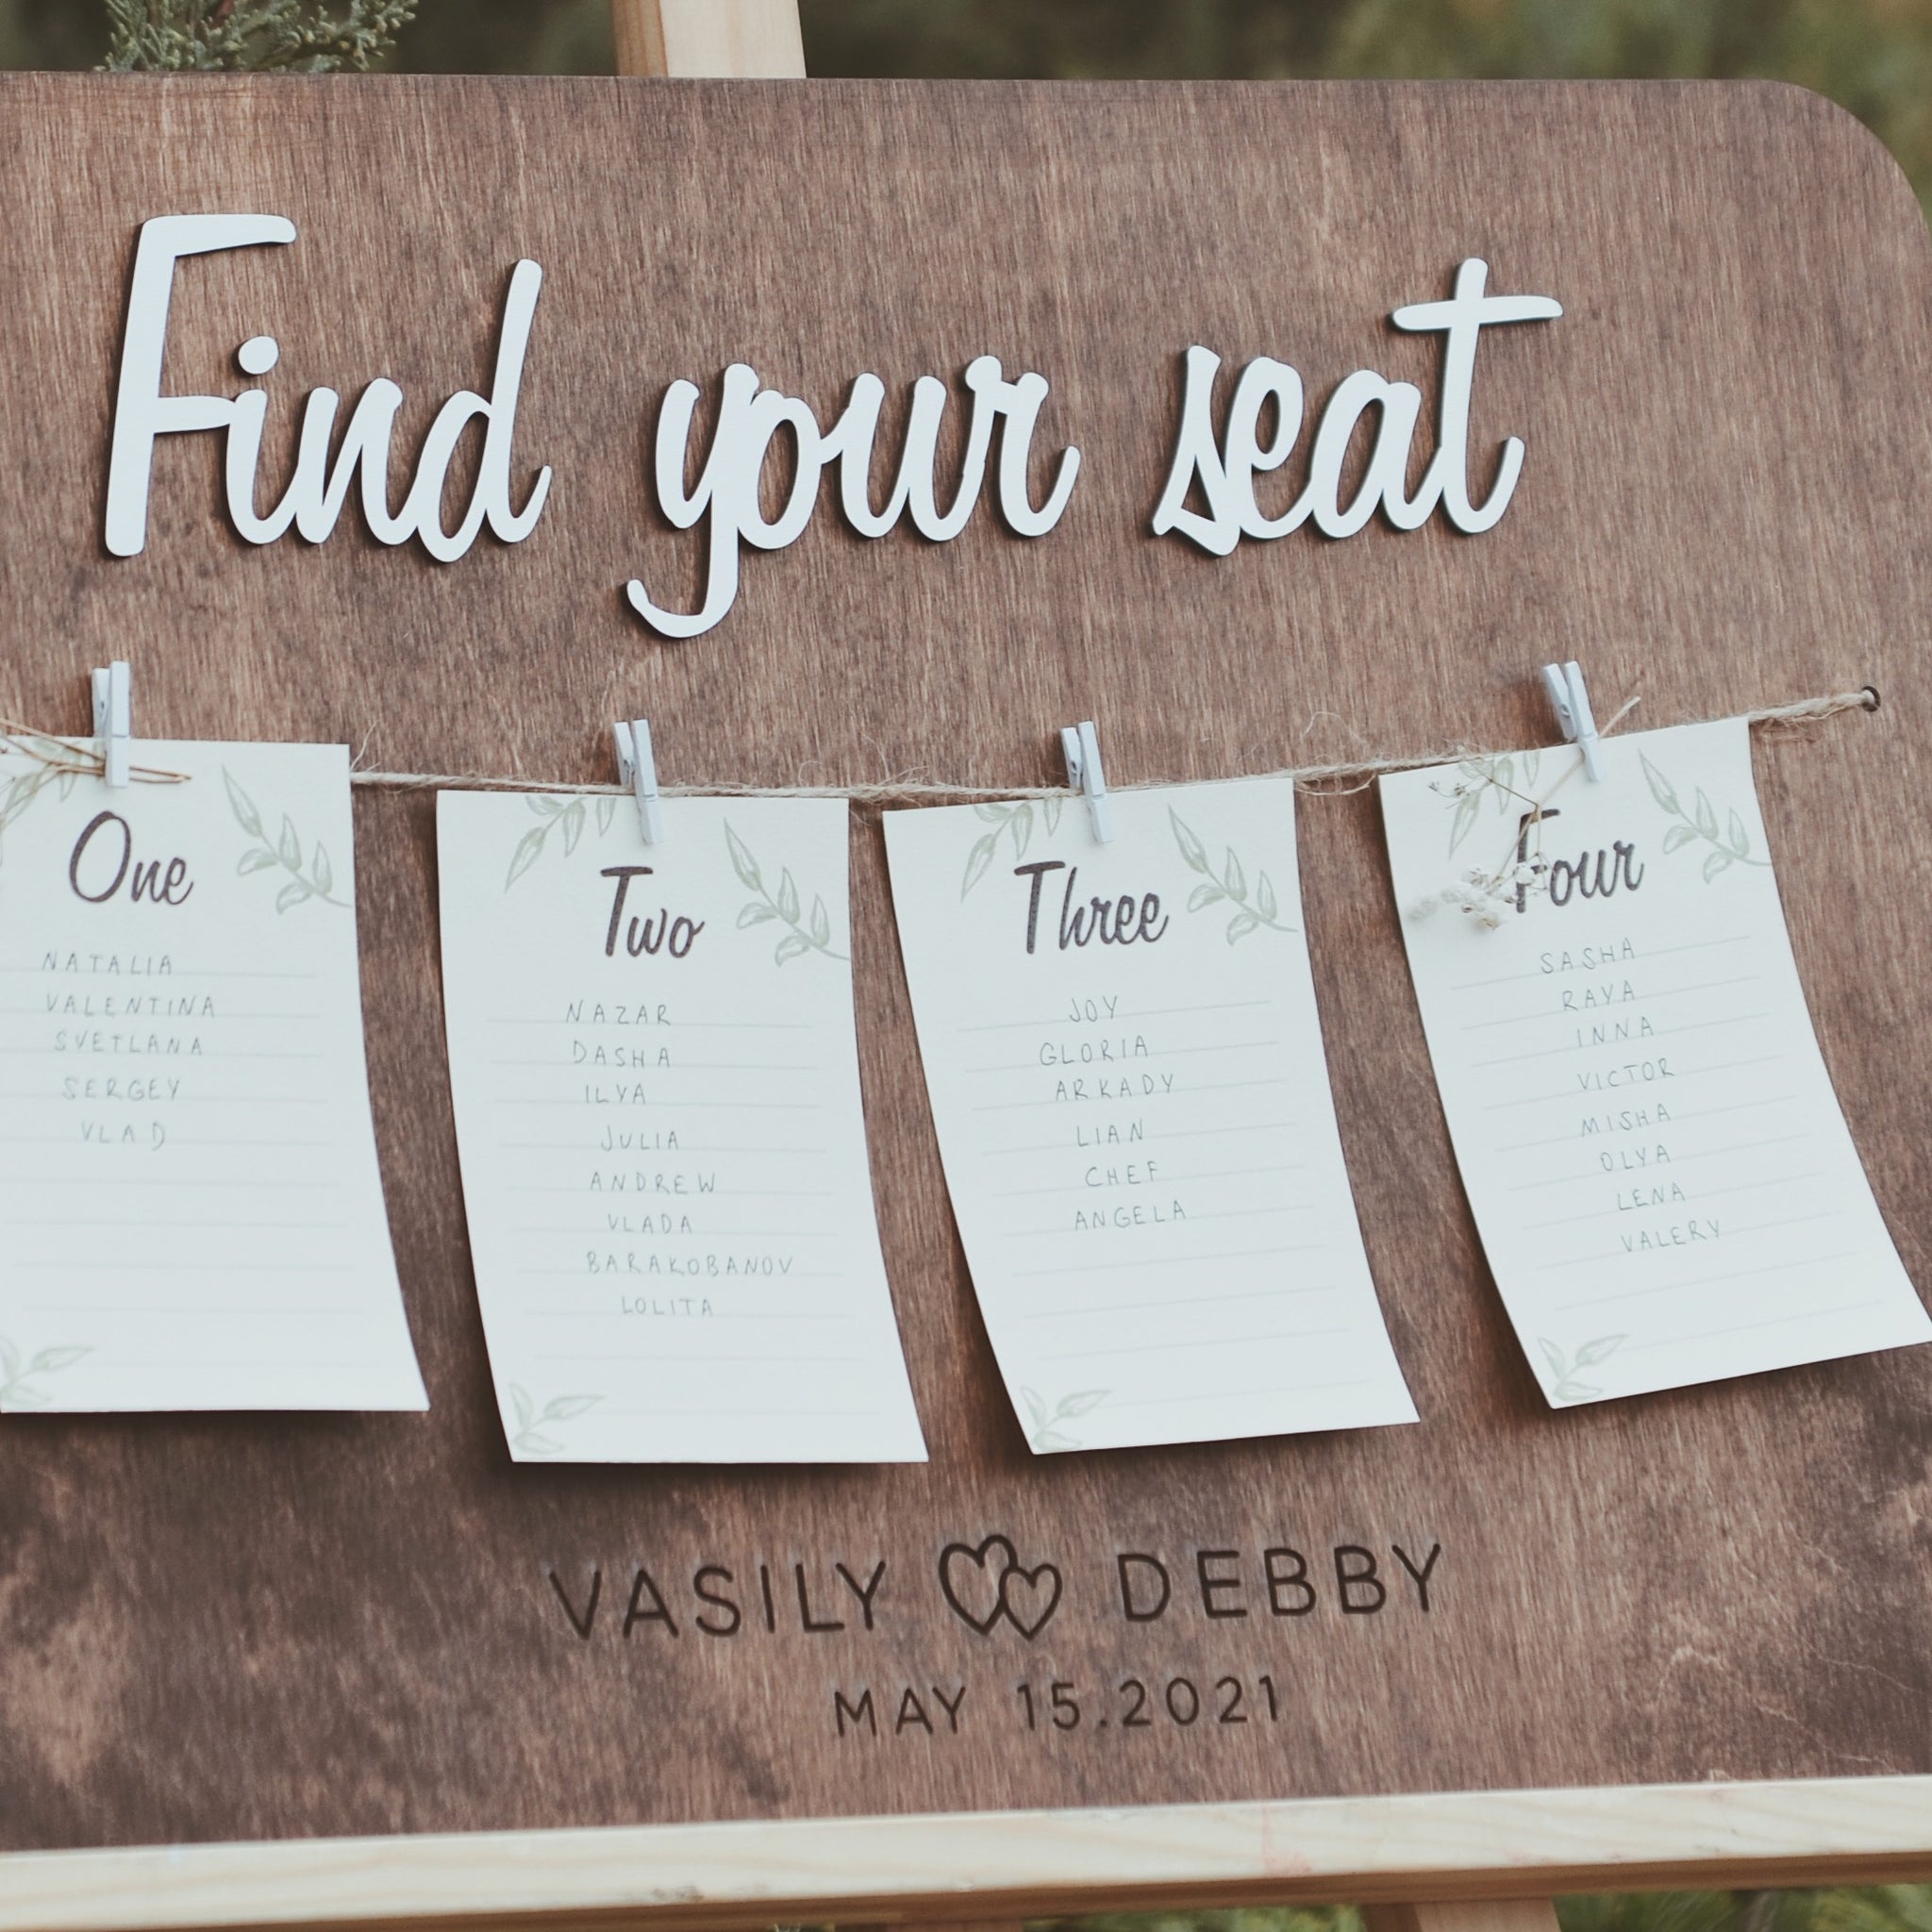 Improve Your Wedding Decor with a Charming Wooden Seating Chart